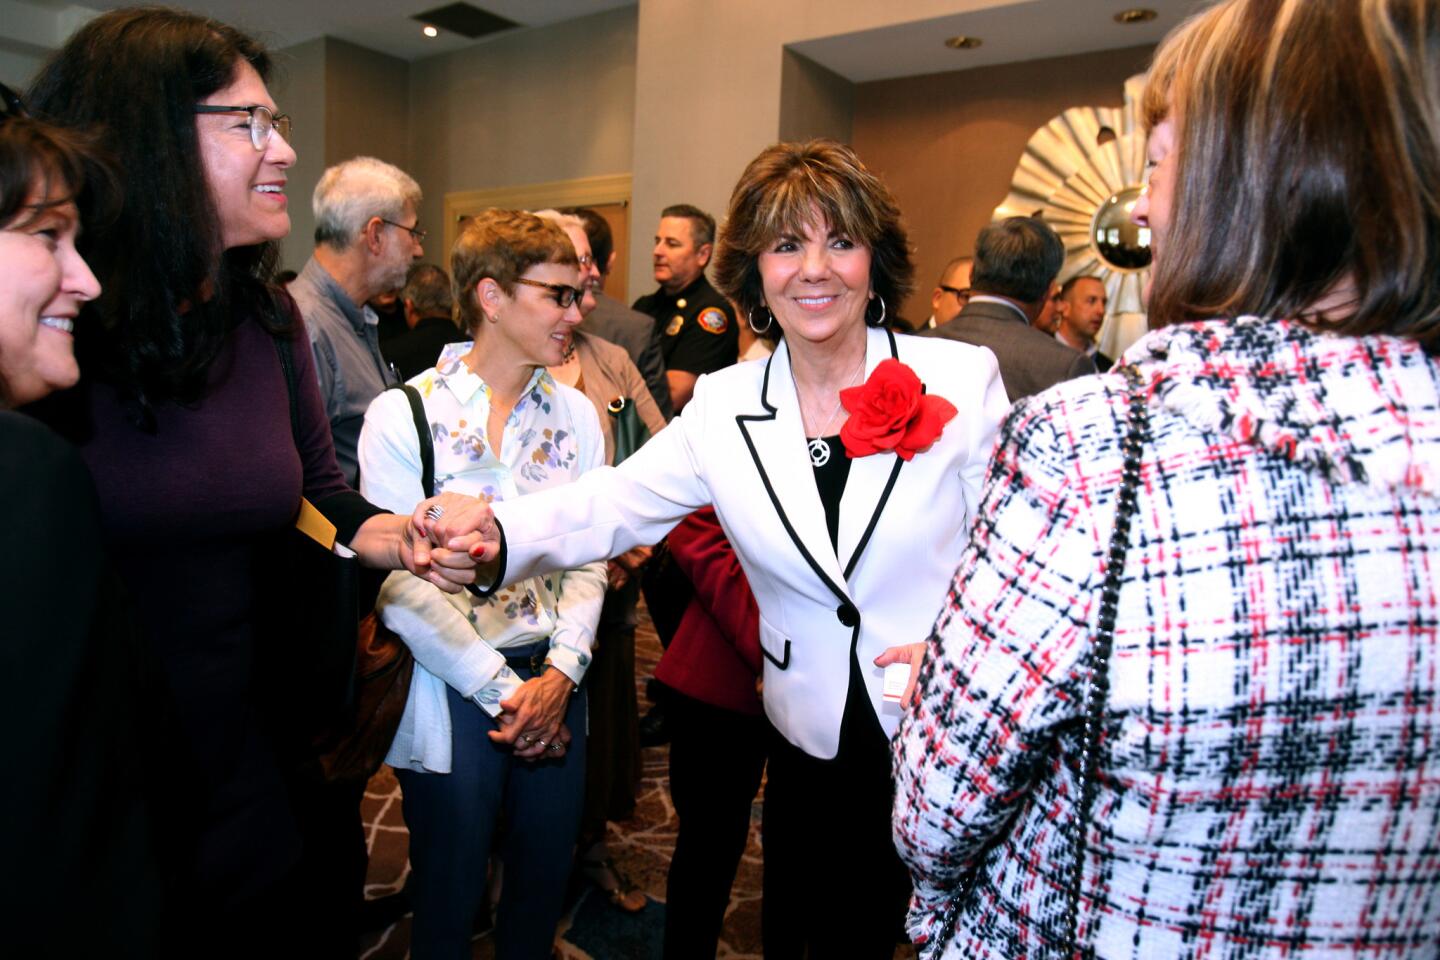 Glendale Mayor Paula Devine, center, greets attendees before delivering her State of the City address.